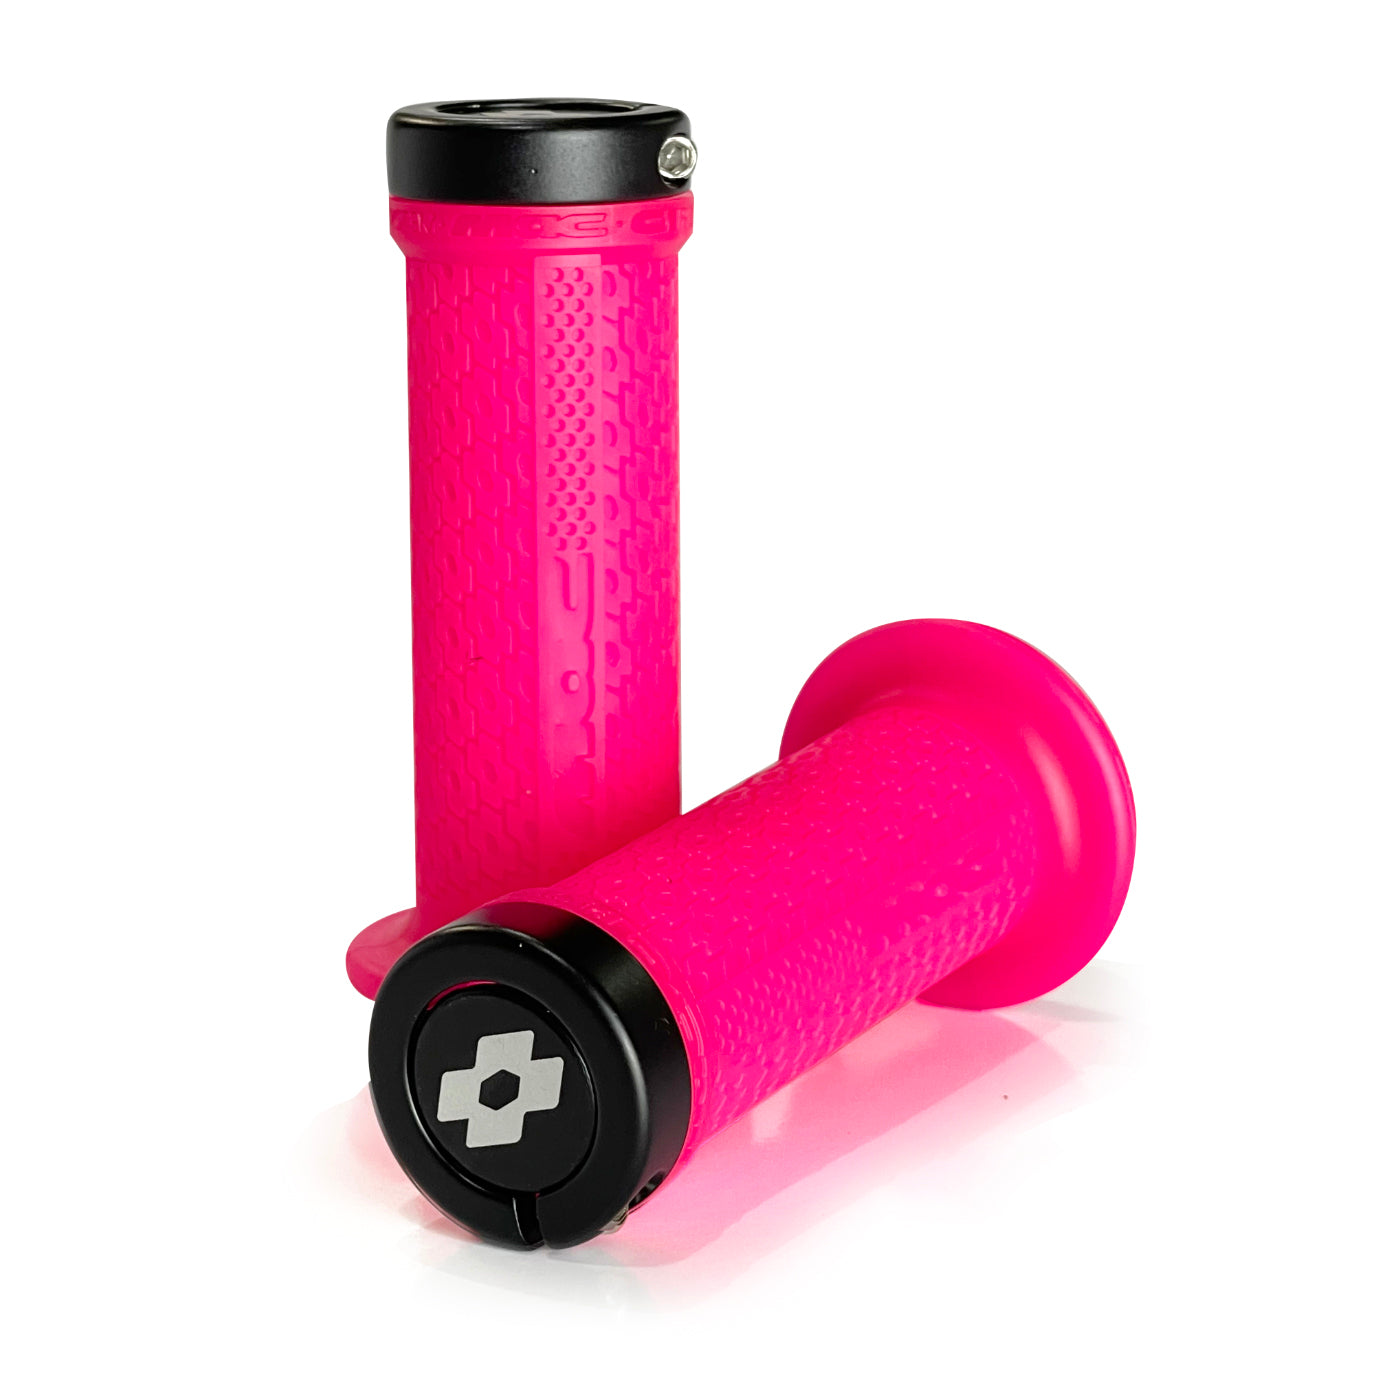 Two bright pink MAC G1 Mini Race Grip Flanged bicycle handlebar grips isolated on a white background.